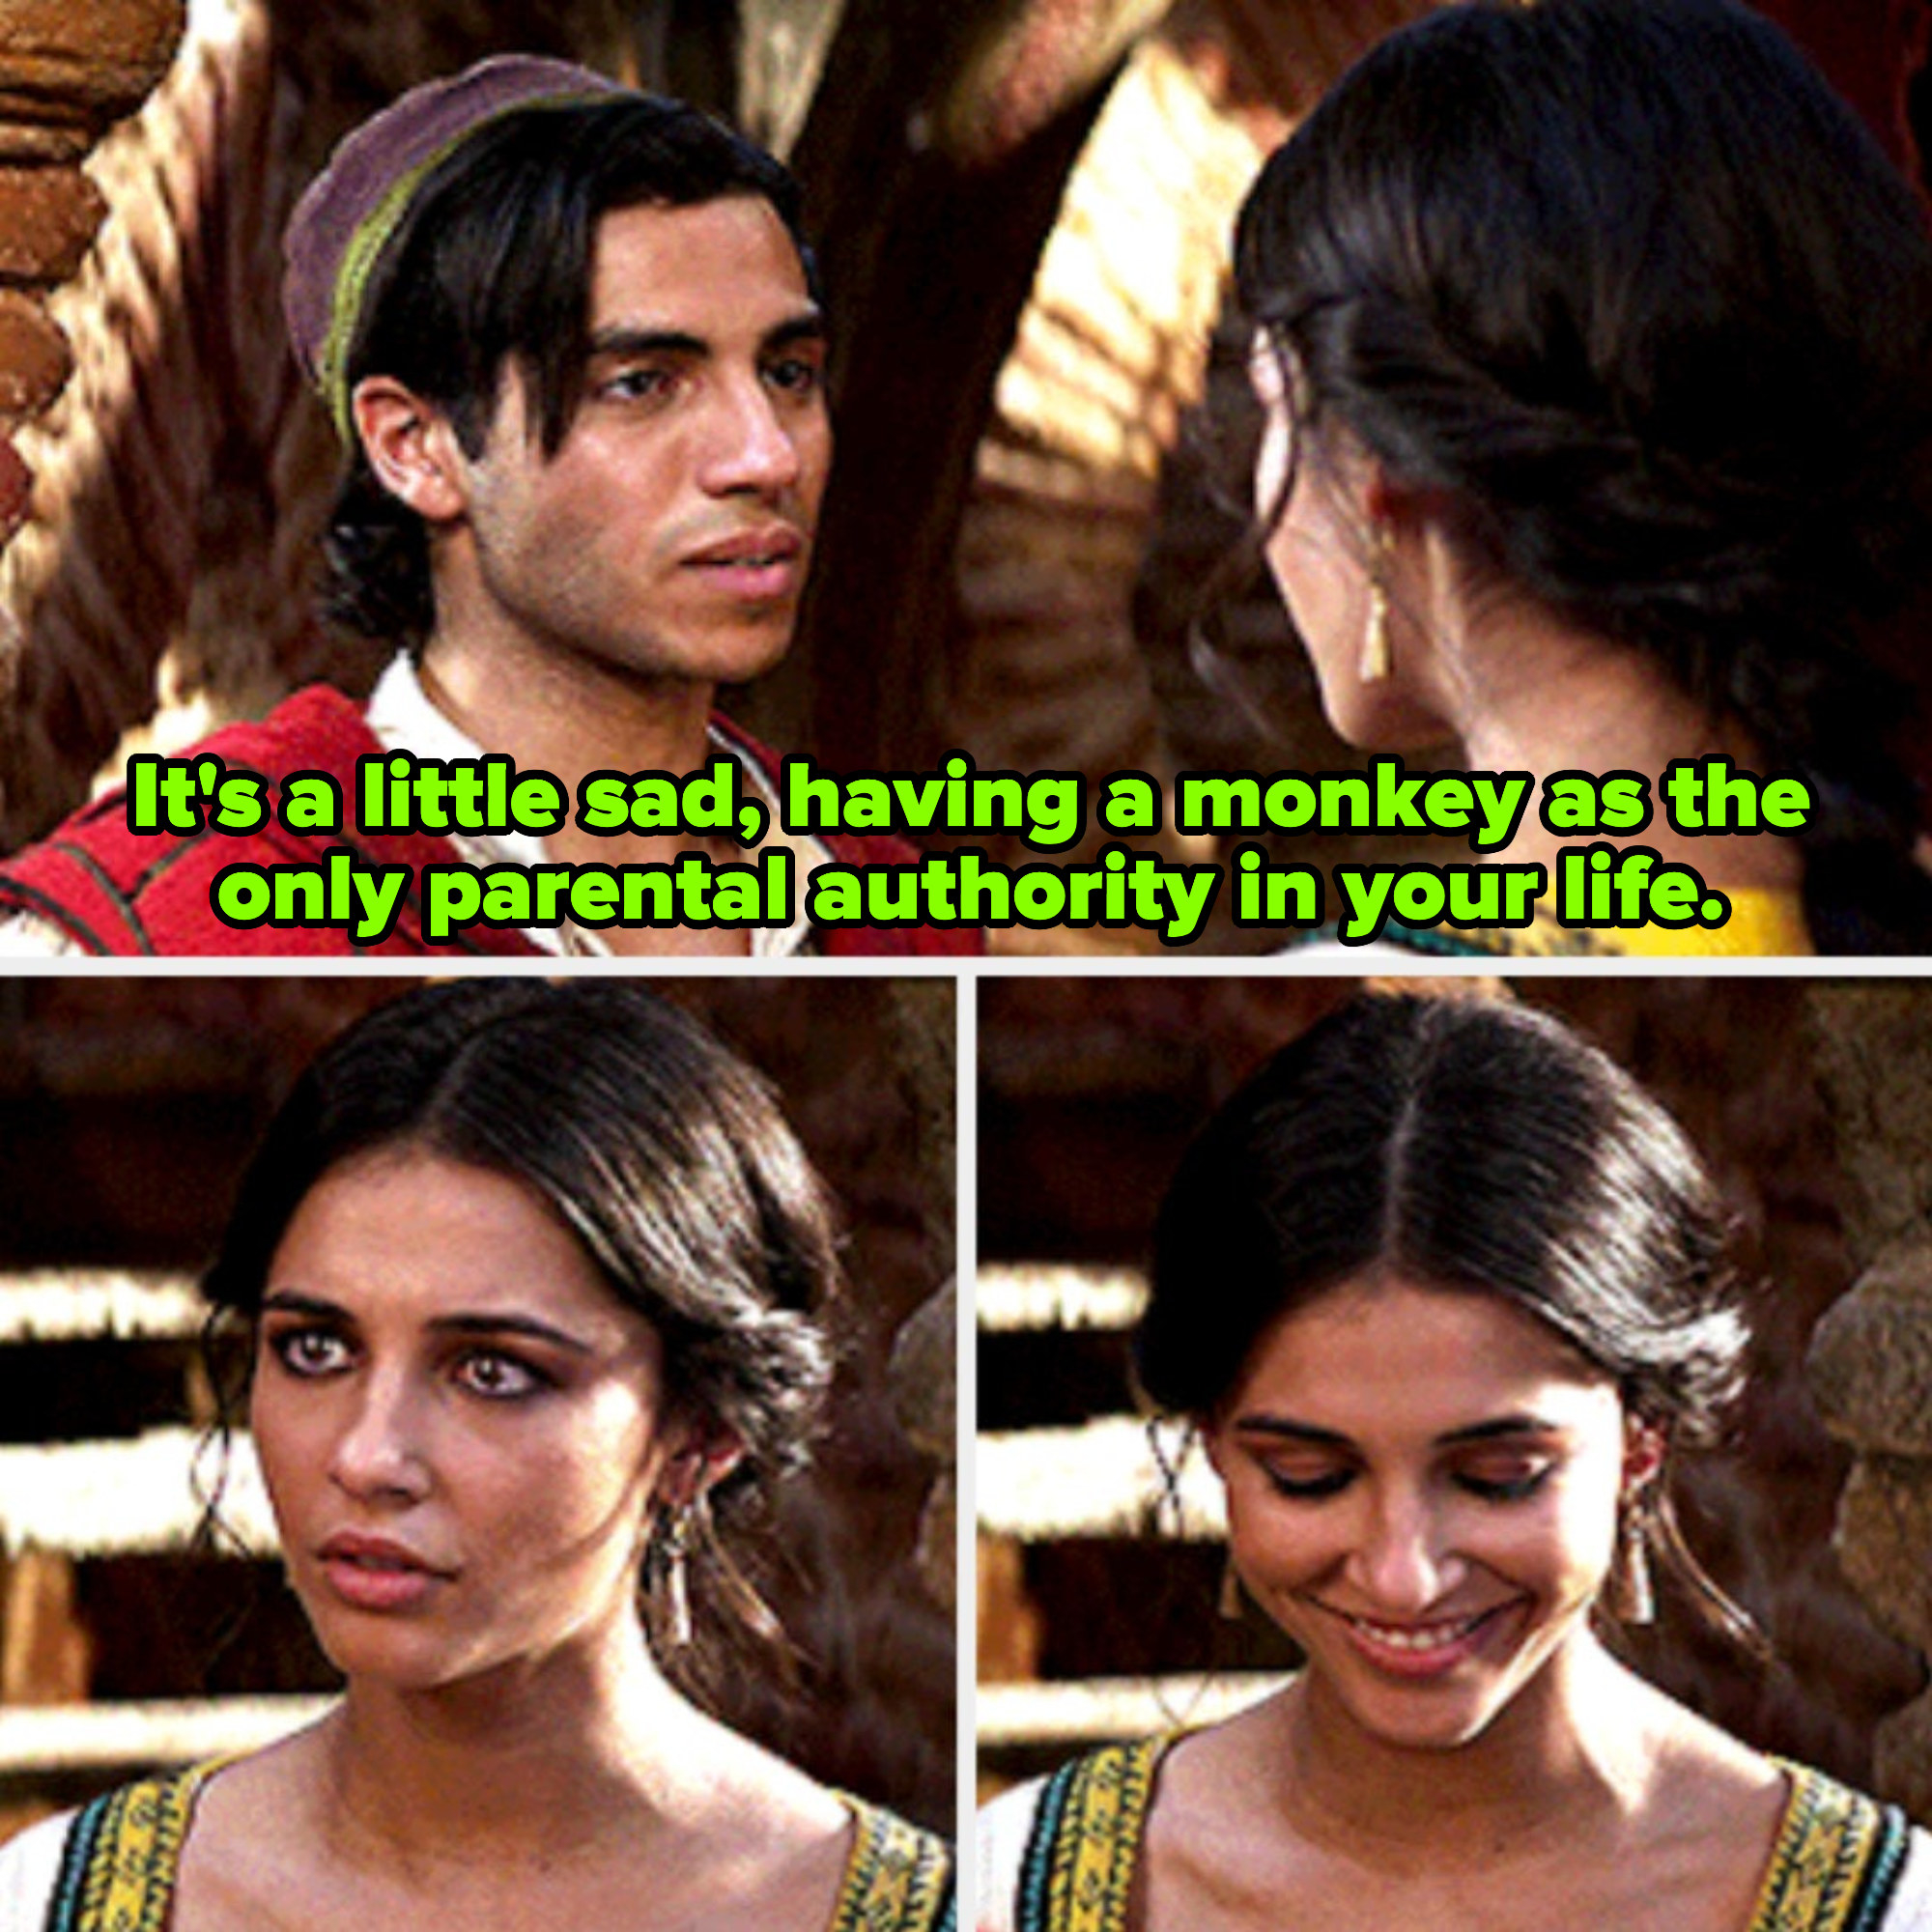 Jasmine telling Aladdin: &quot;It&#x27;s a little sad, having a monkey as the only parental authority in your life&quot;